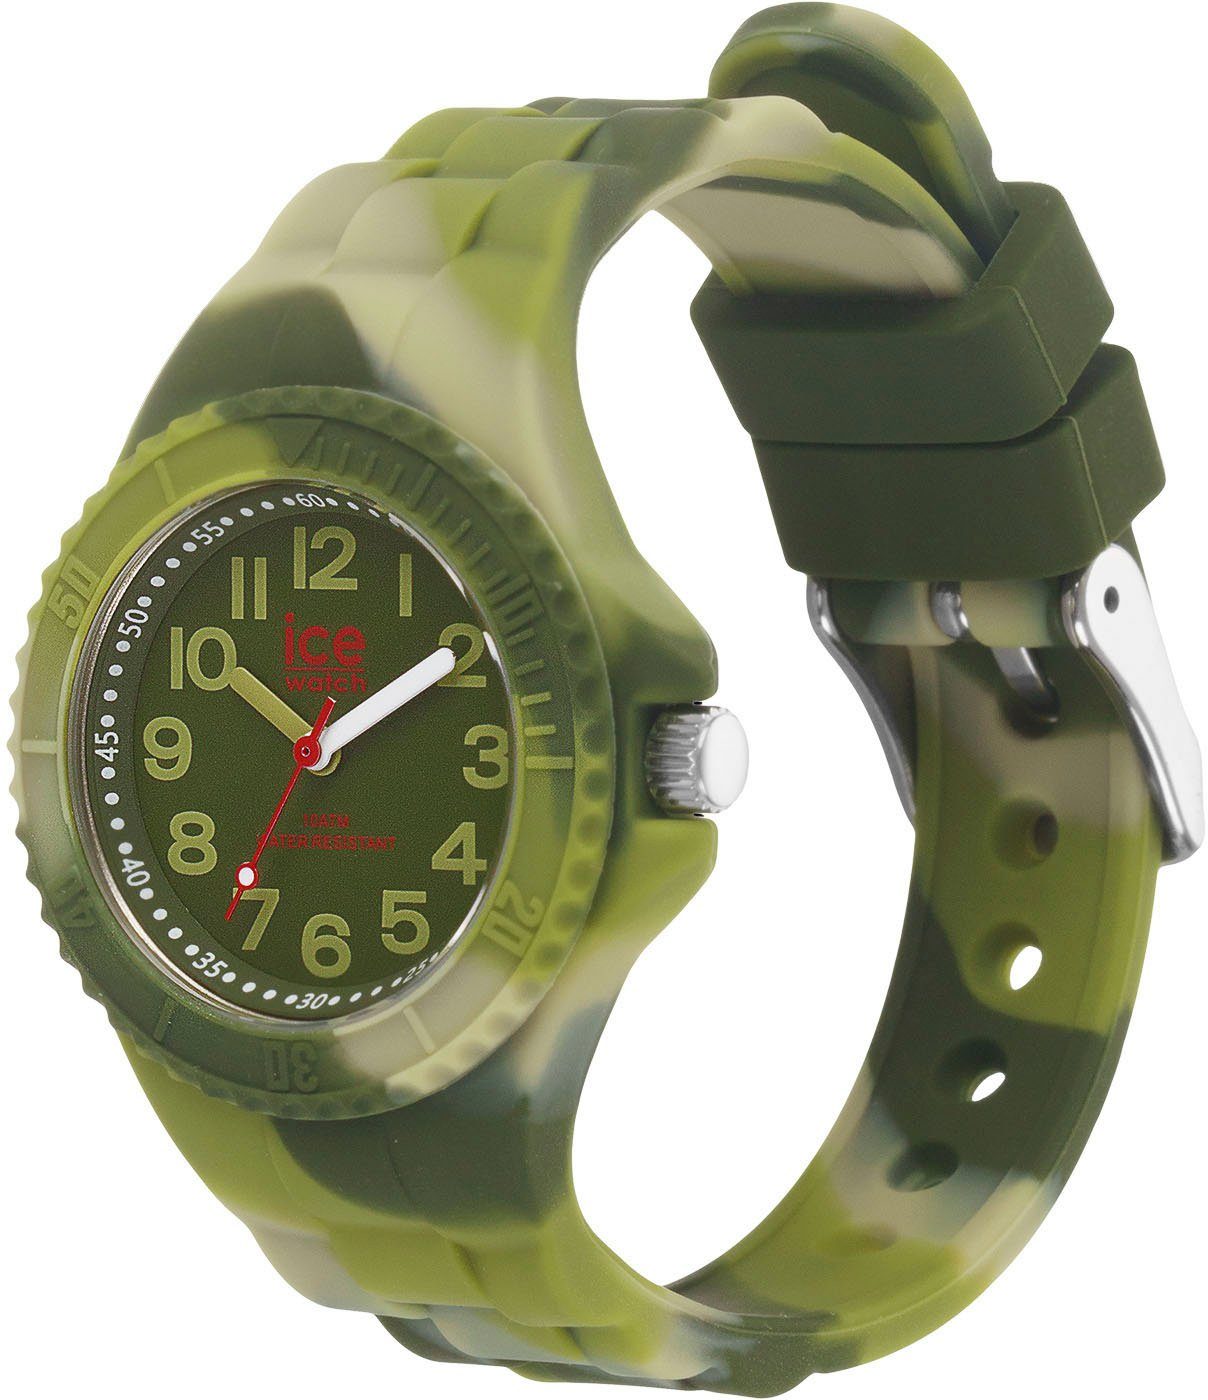 auch - small Green - shades ICE extra Geschenk, ideal ICE 021235 tie green Quarzuhr 021235, ice-watch als Extra-Small 3H, - dye and shades